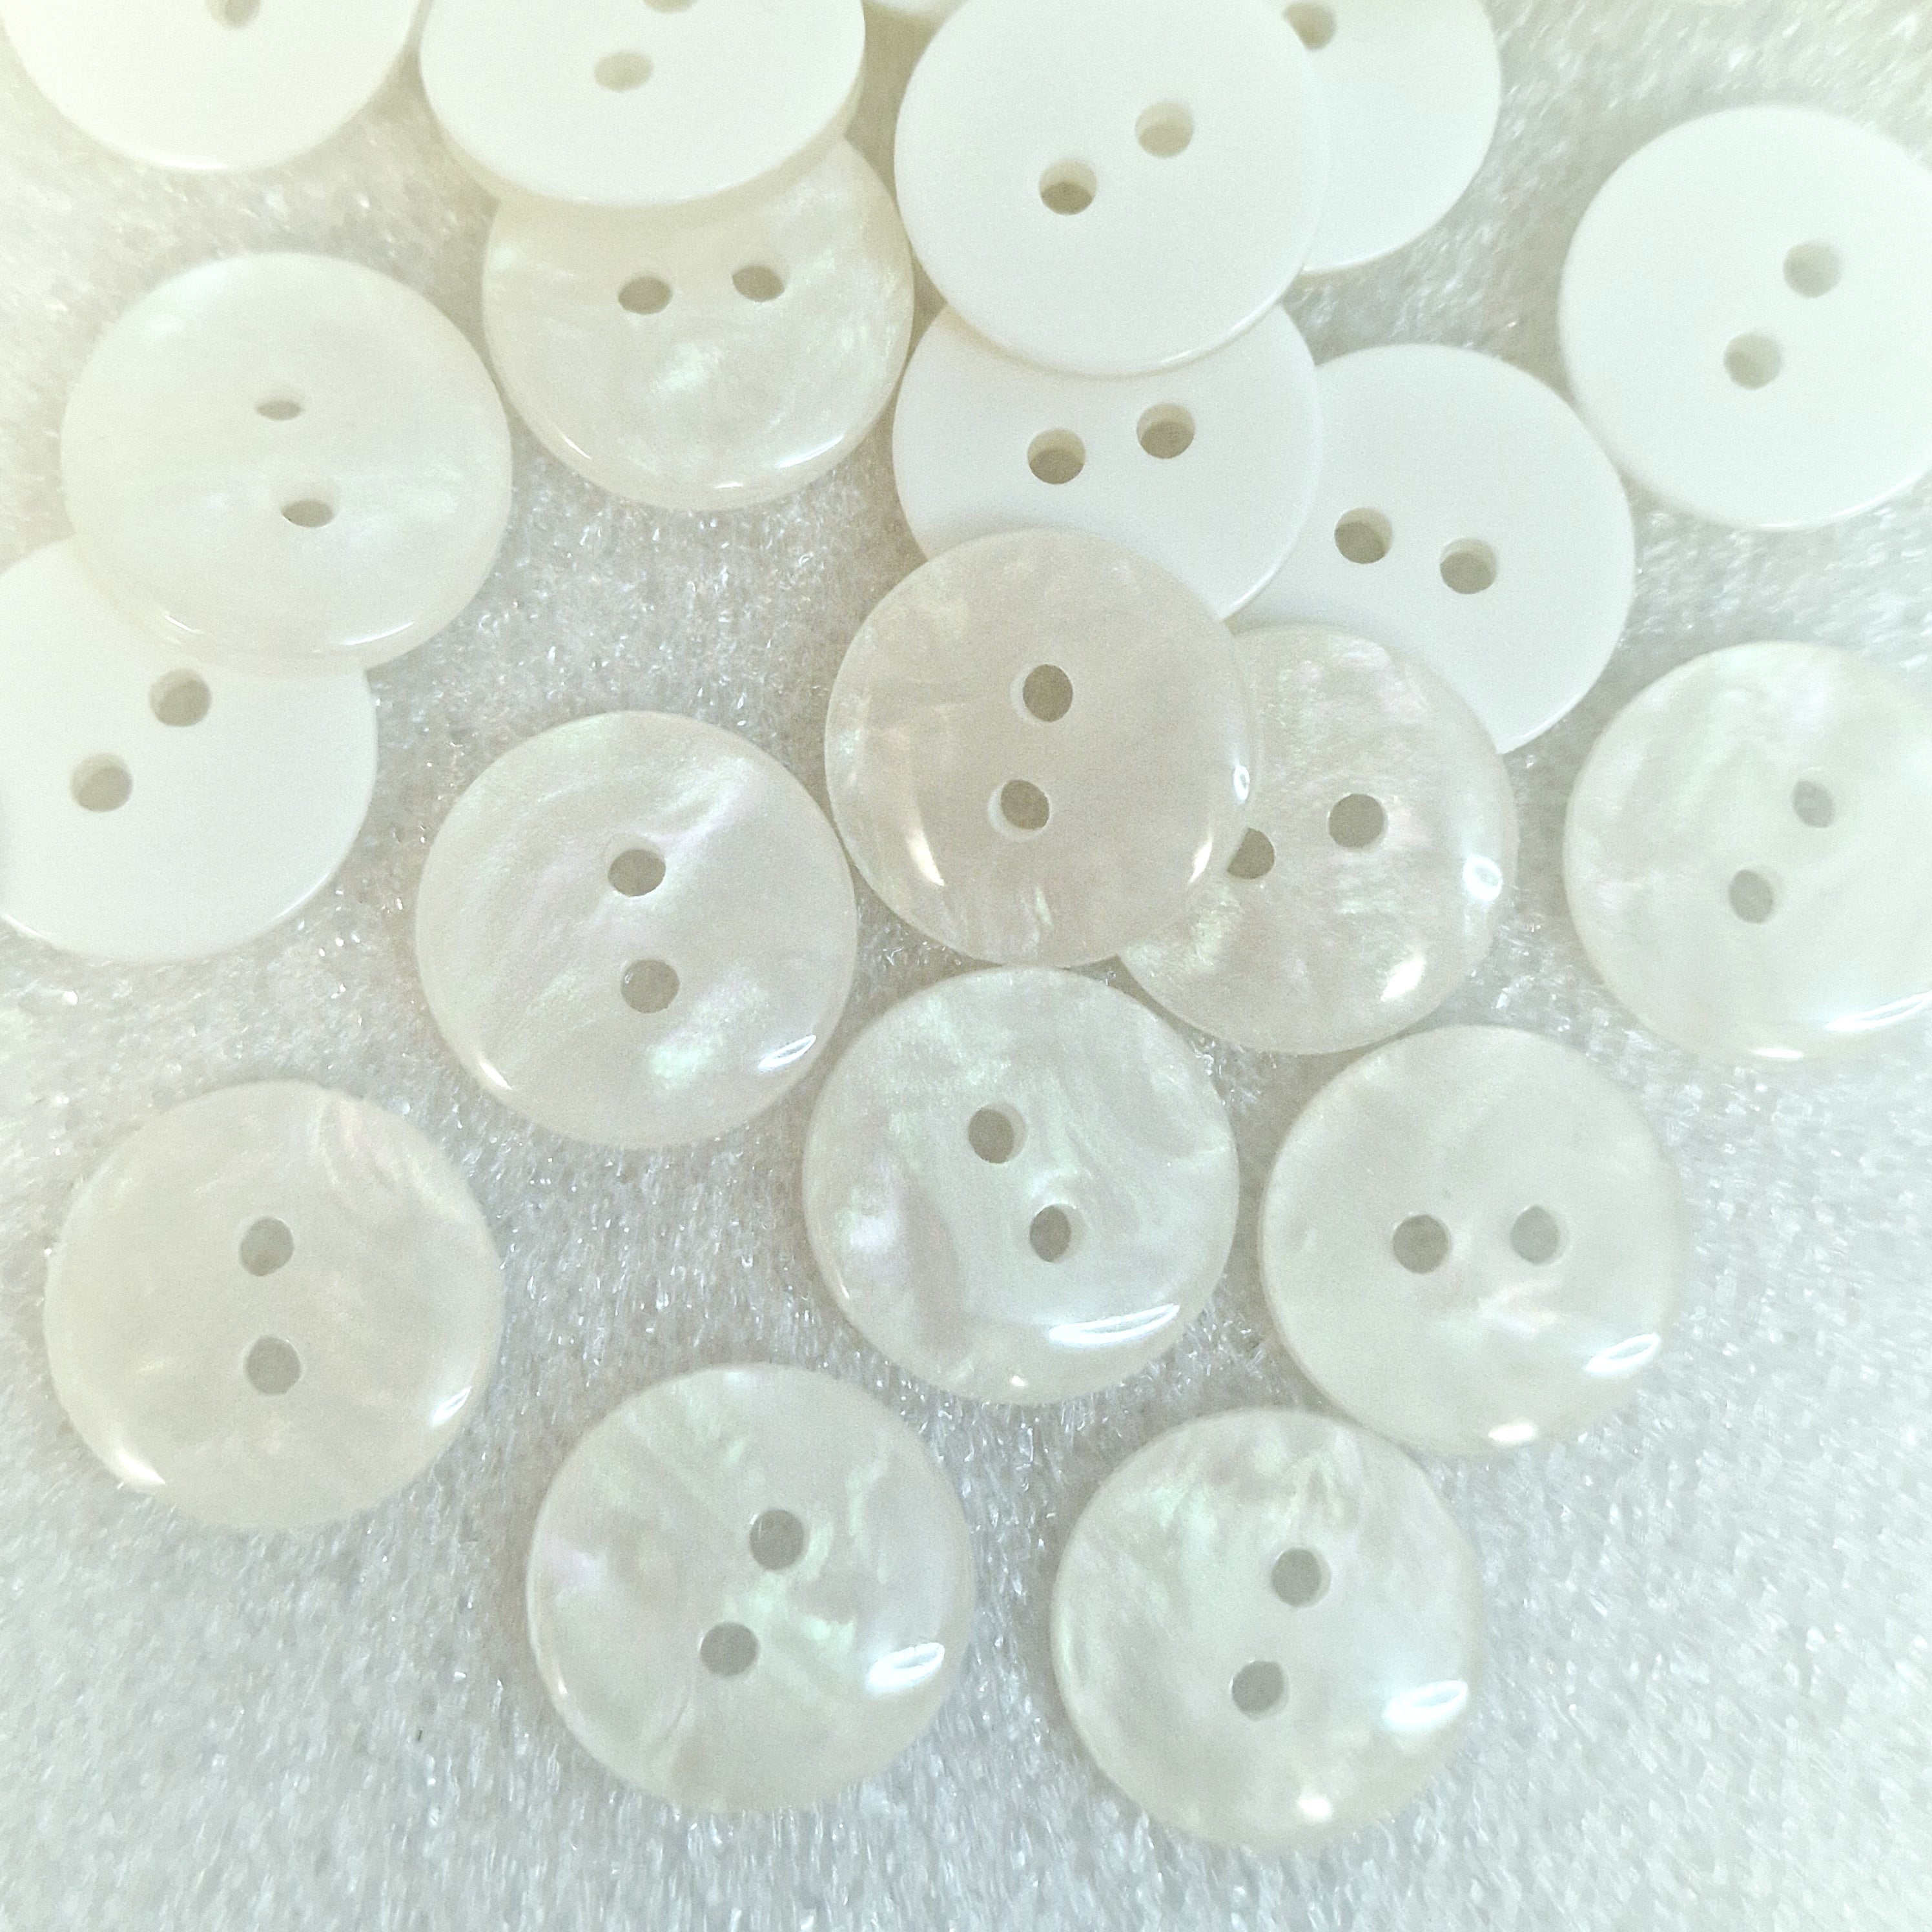 MajorCrafts 60pcs 12.5mm Cream White Pearlescent Galaxy Effect 2 Holes Small Round Resin Sewing Buttons